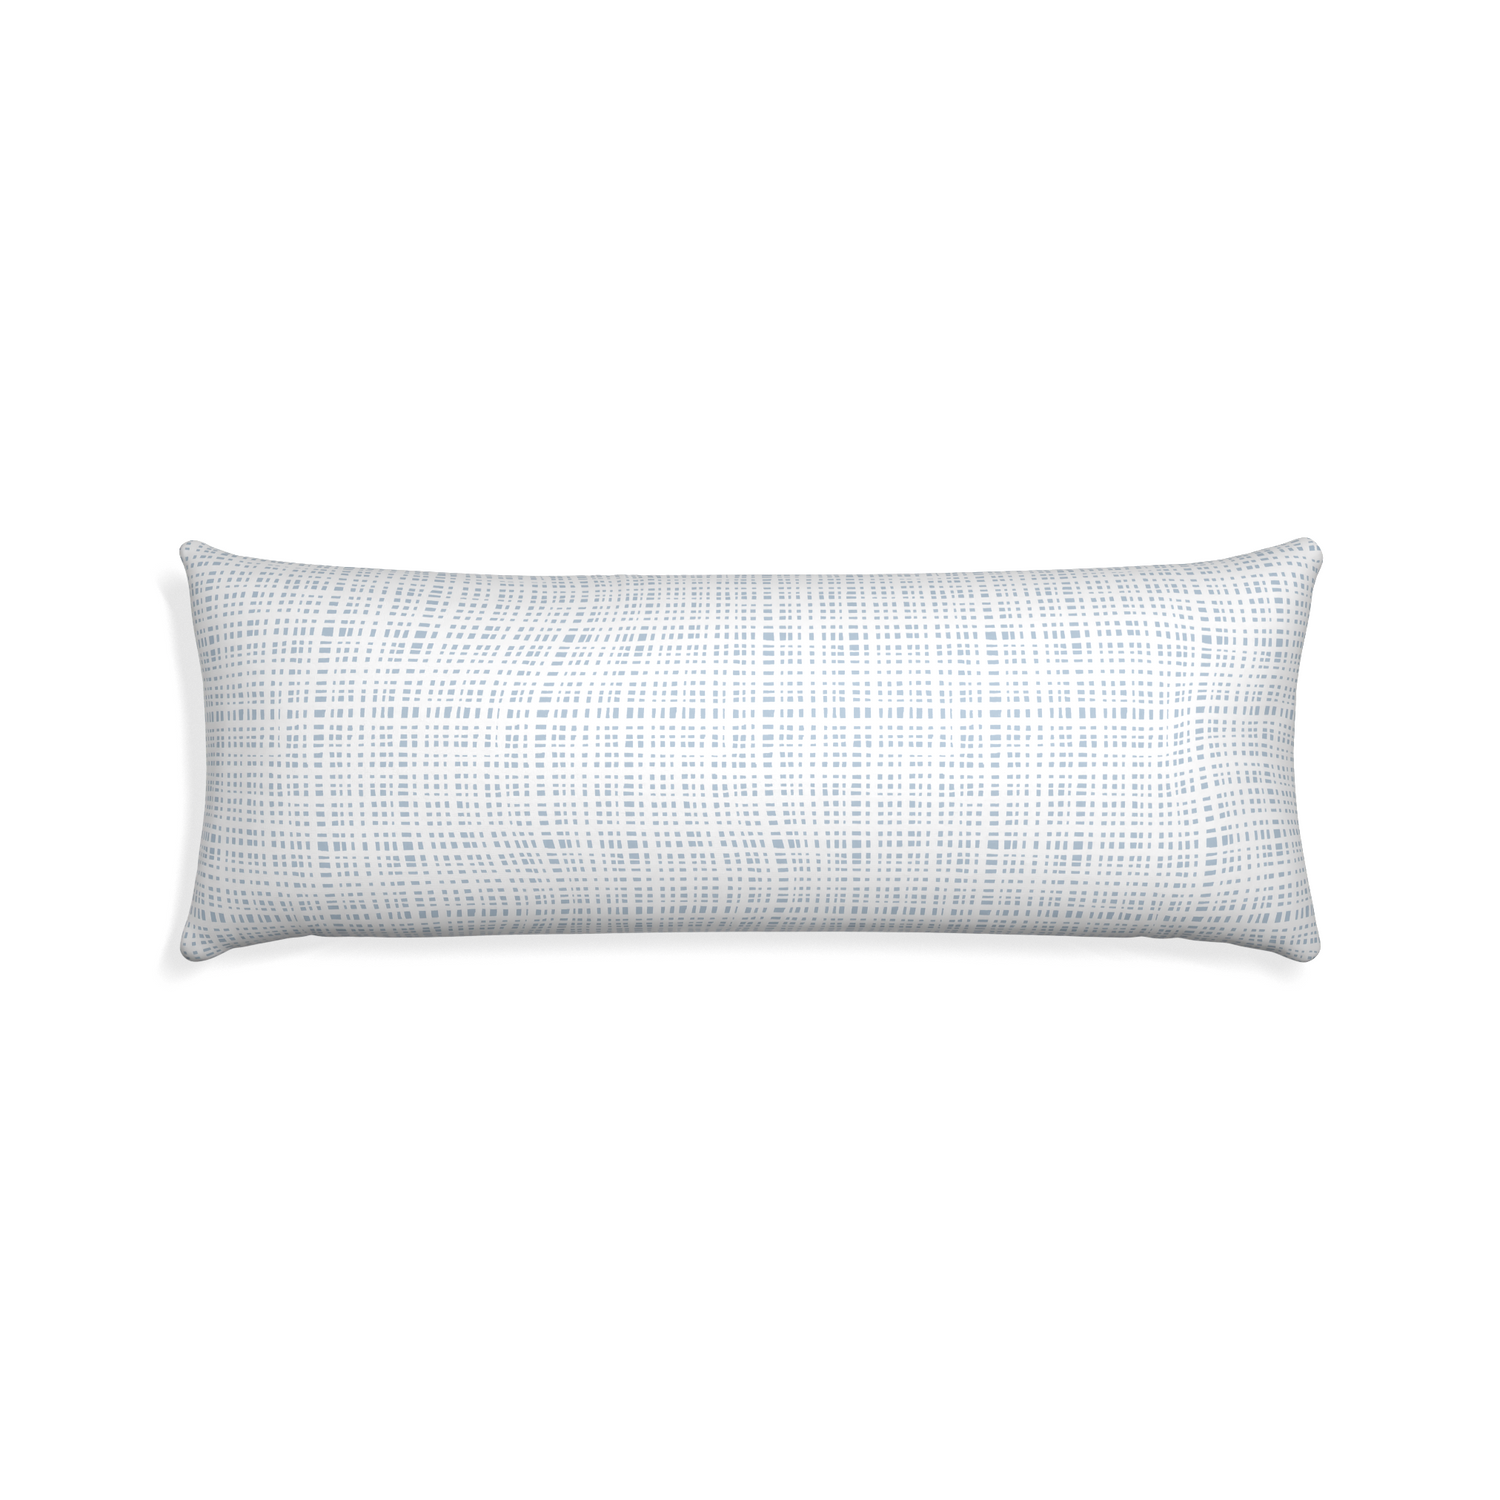 Xl-lumbar ginger sky custom pillow with none on white background